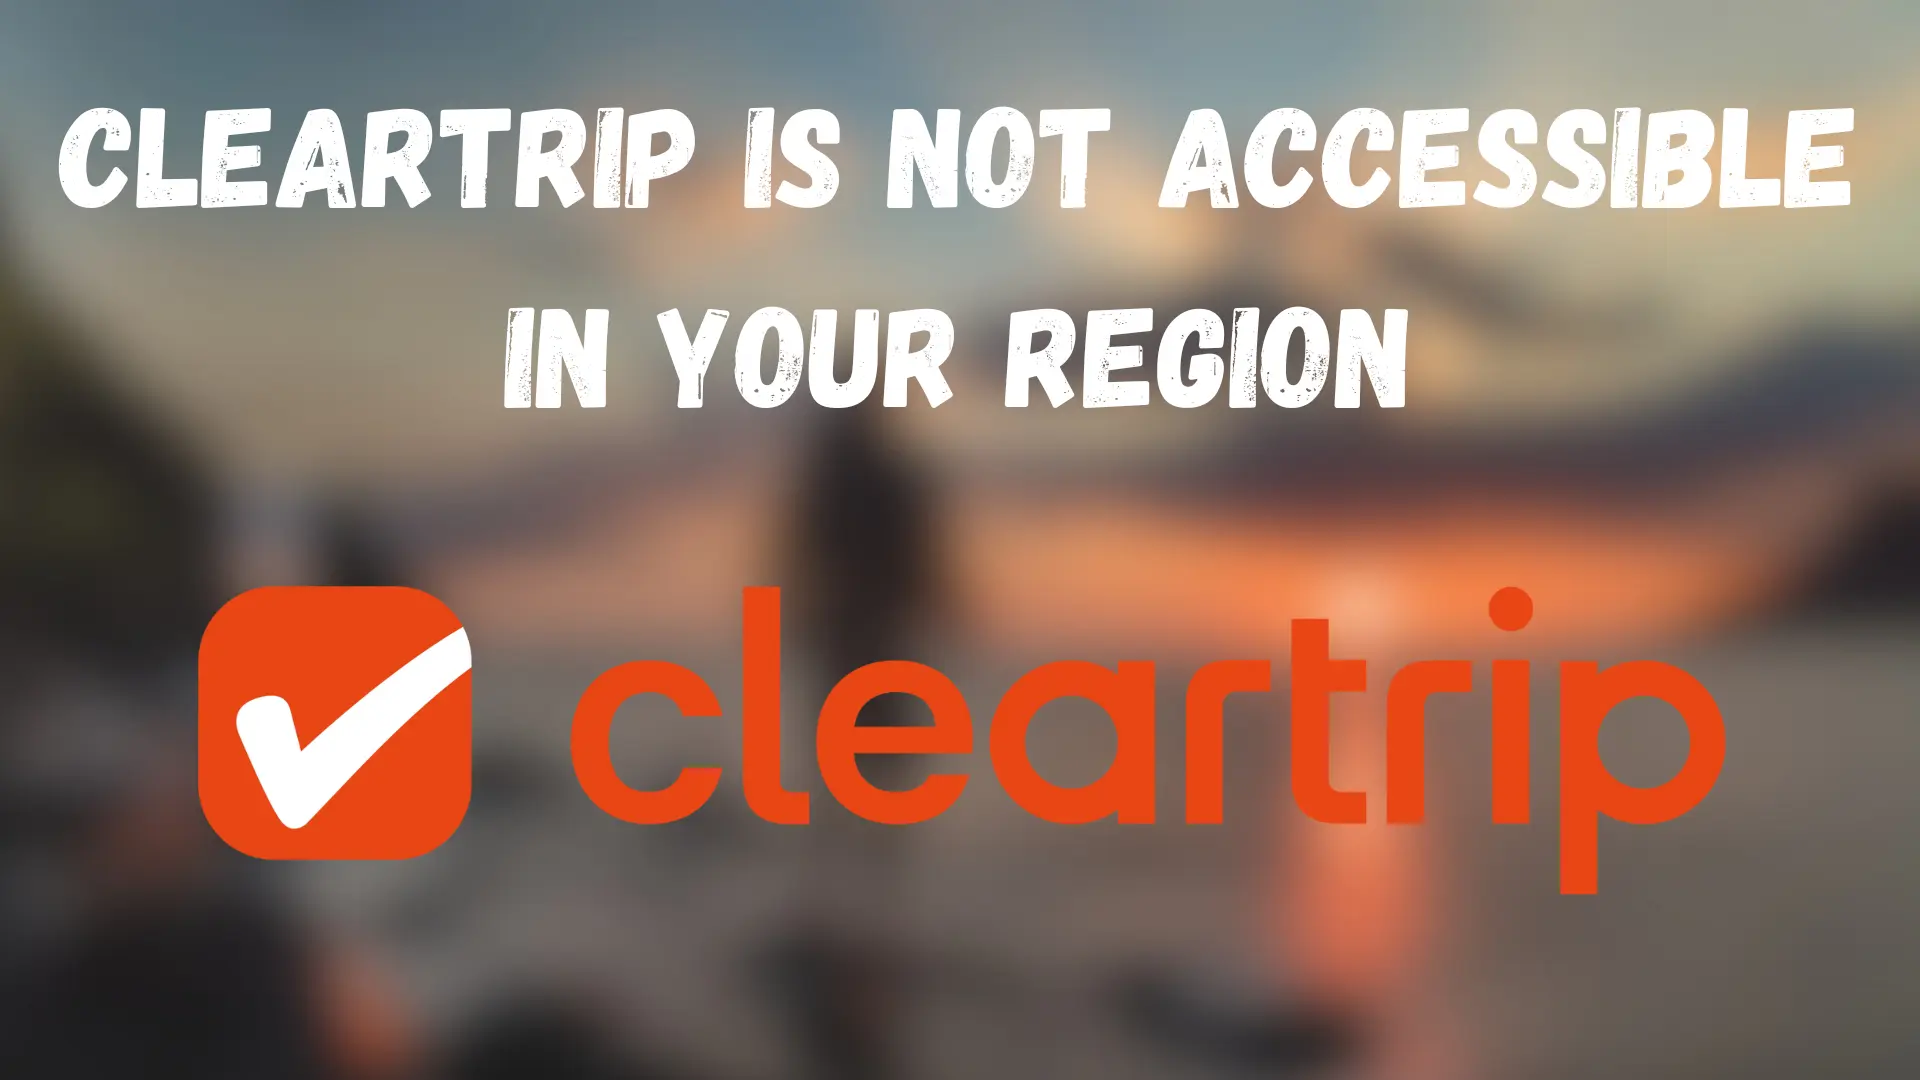 cleartrip is not accessible in your region